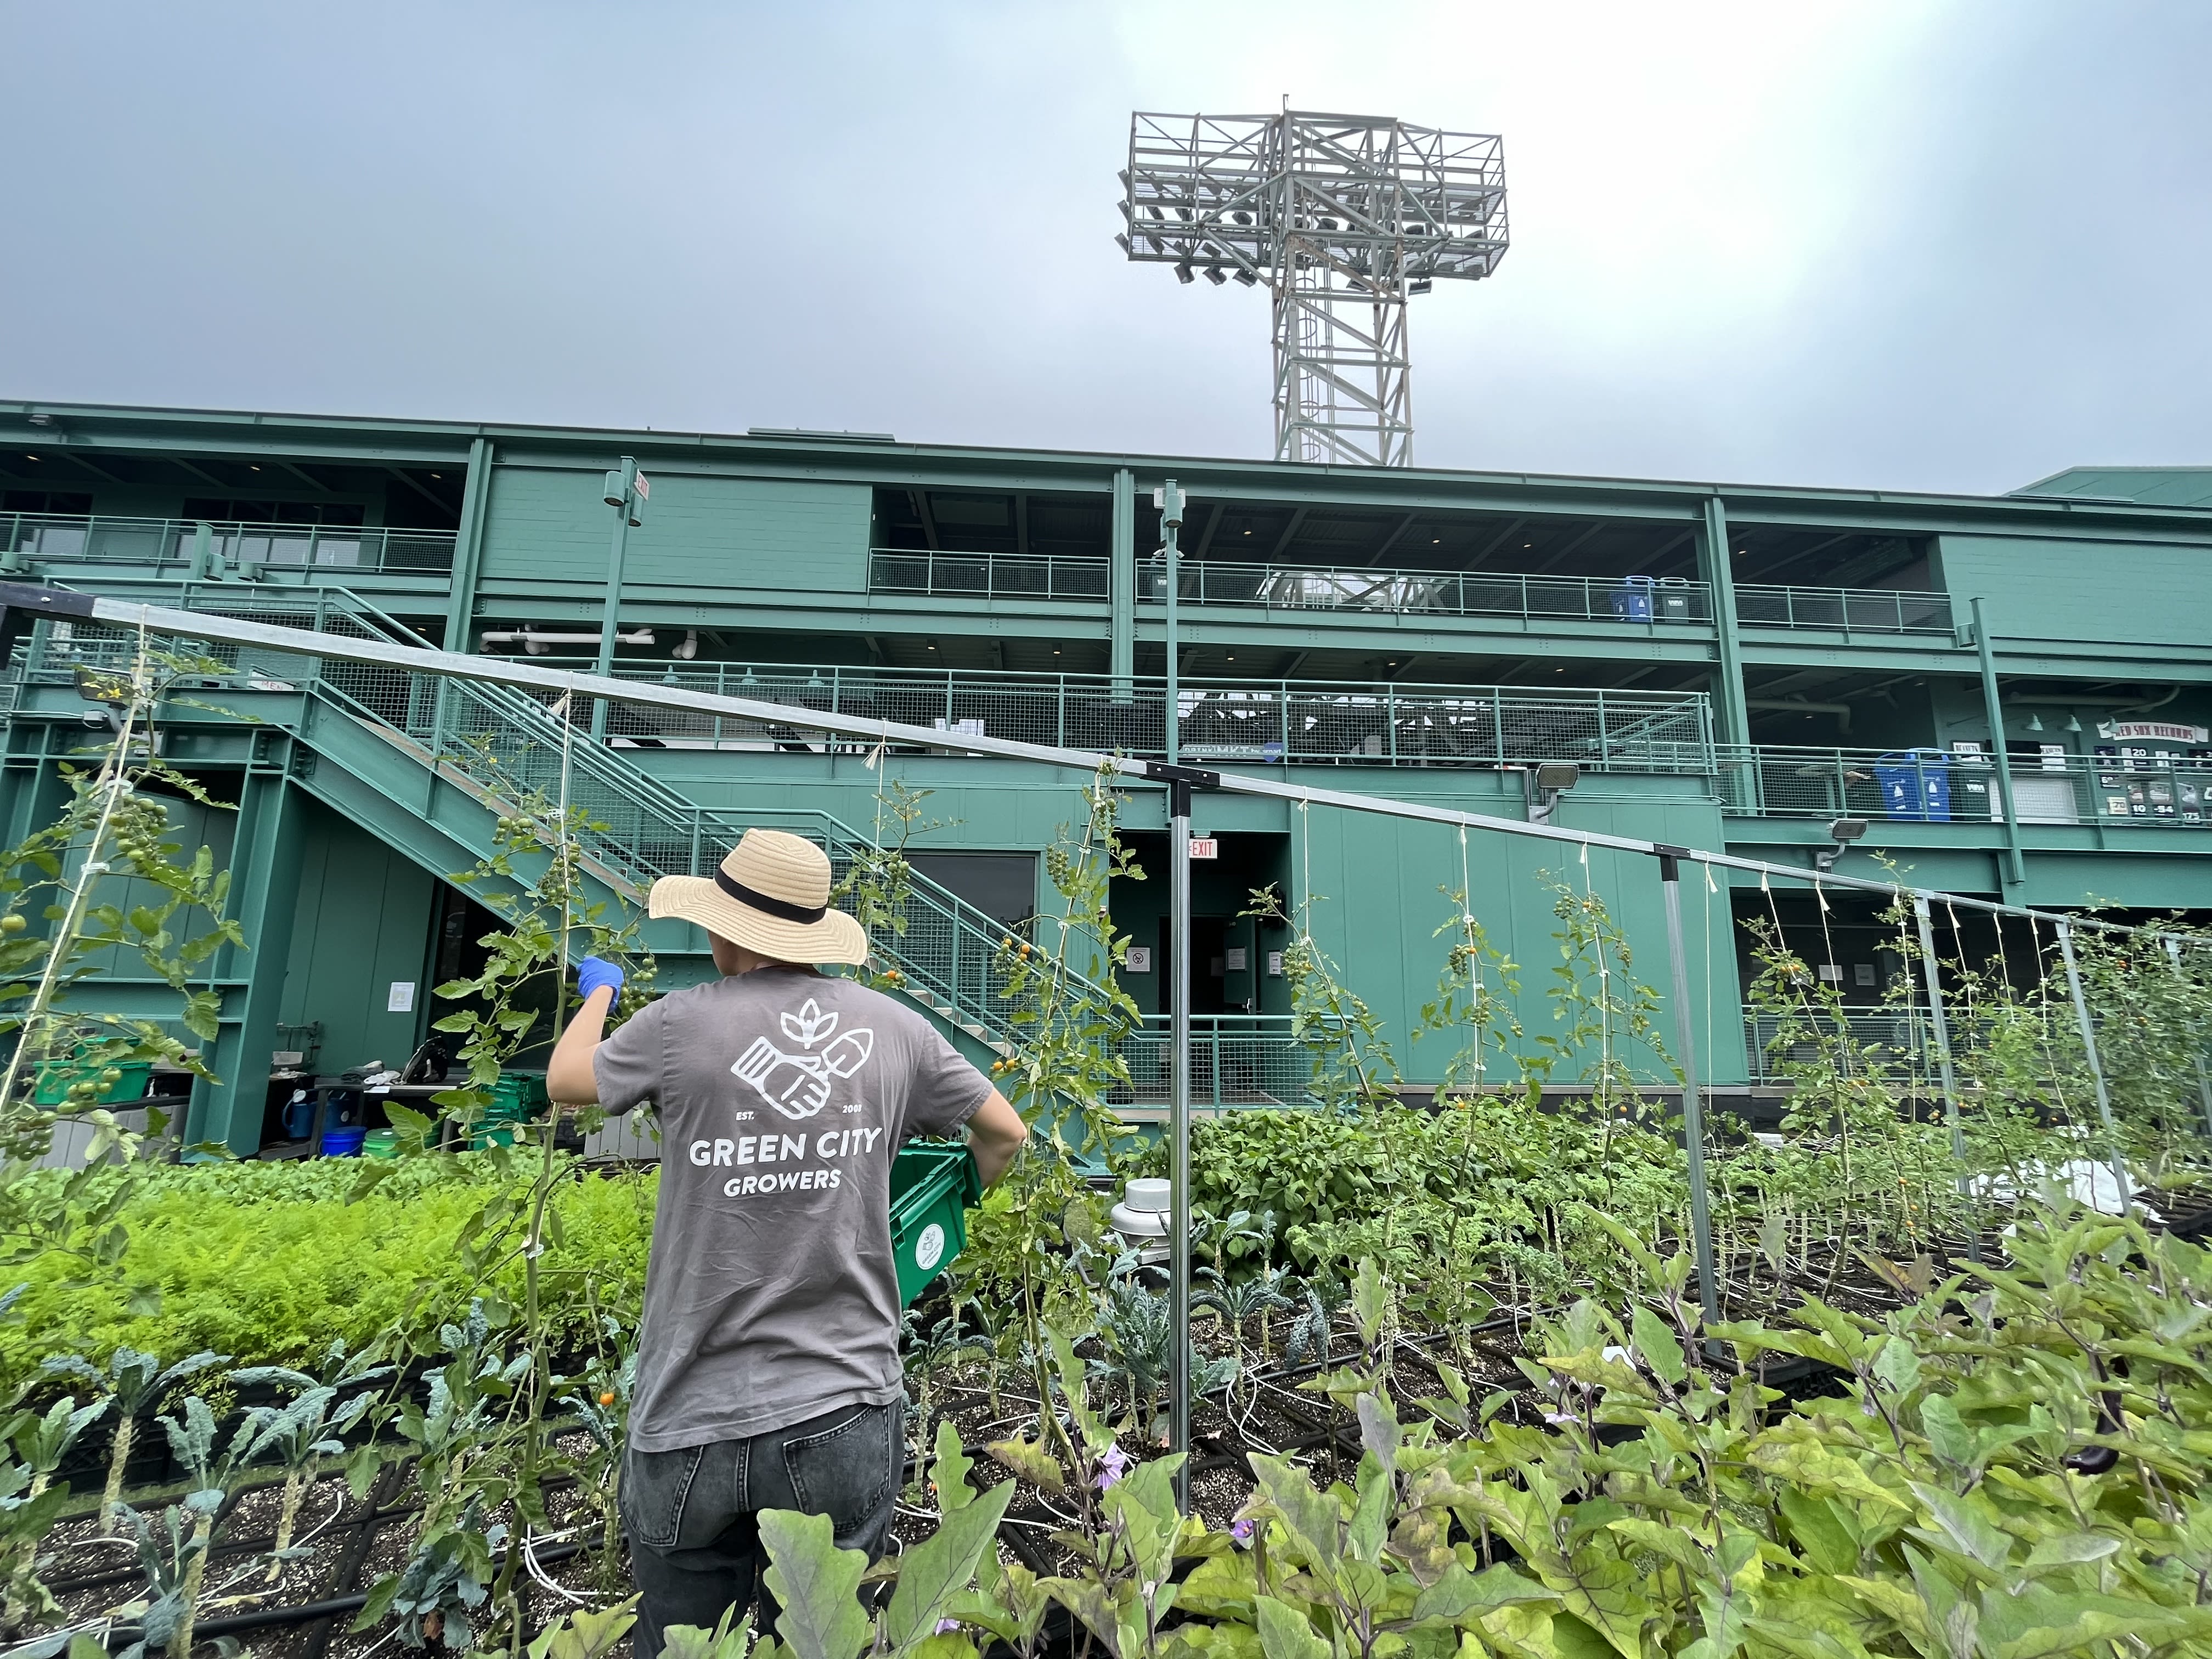 Fenway Farms: On the roof of an iconic sports venue, this urban farm in  Boston can grow 6,000 pounds of produce a year